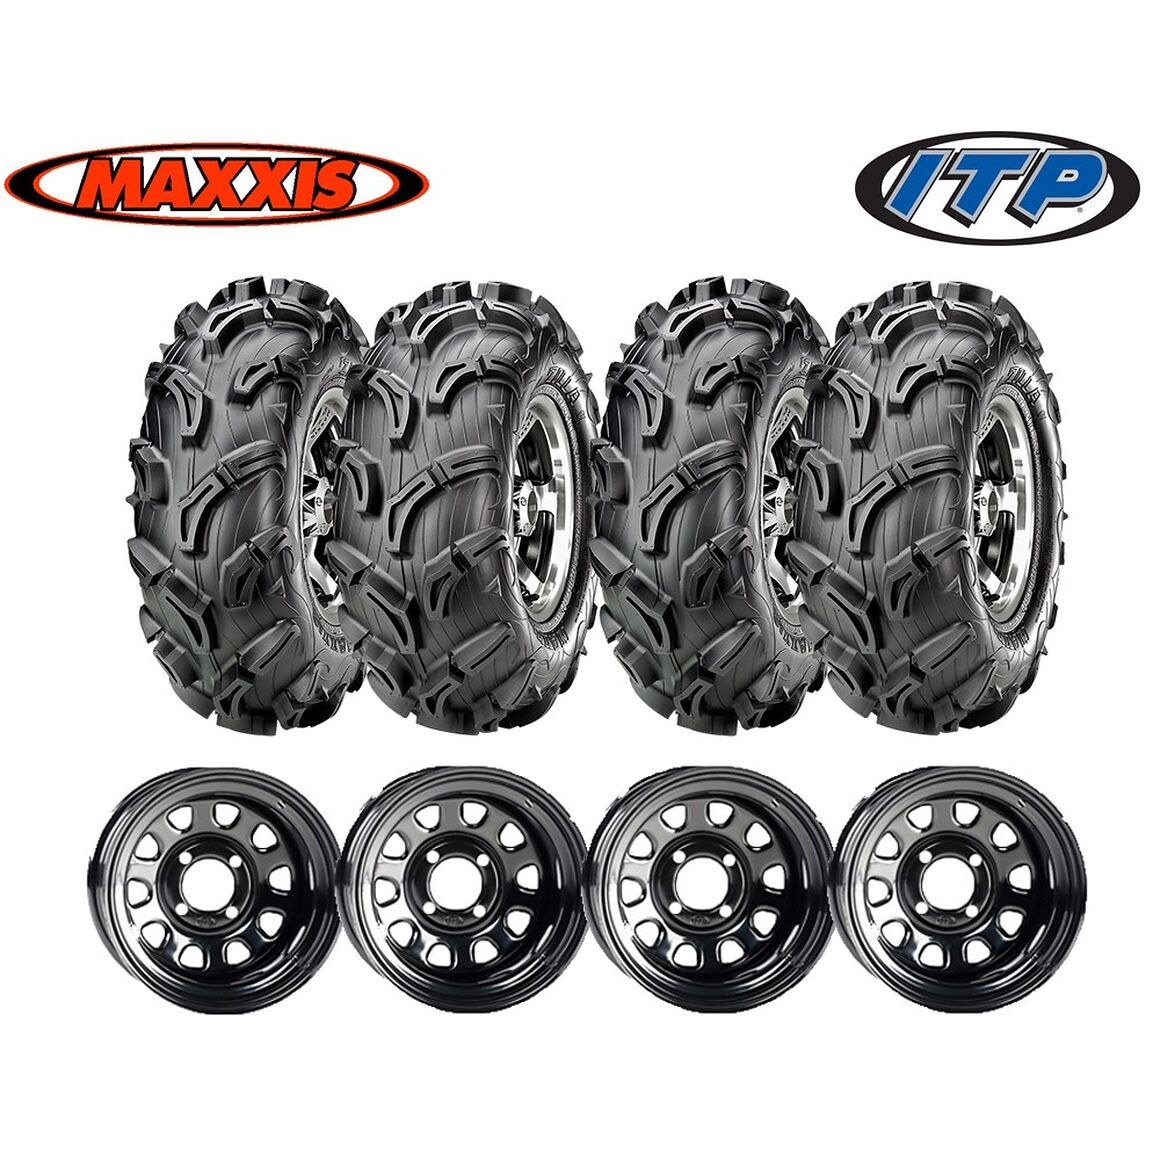 Full set of Maxxis Zilla 26x9-12 and 26x11-12 ATV Mud Tires 4 